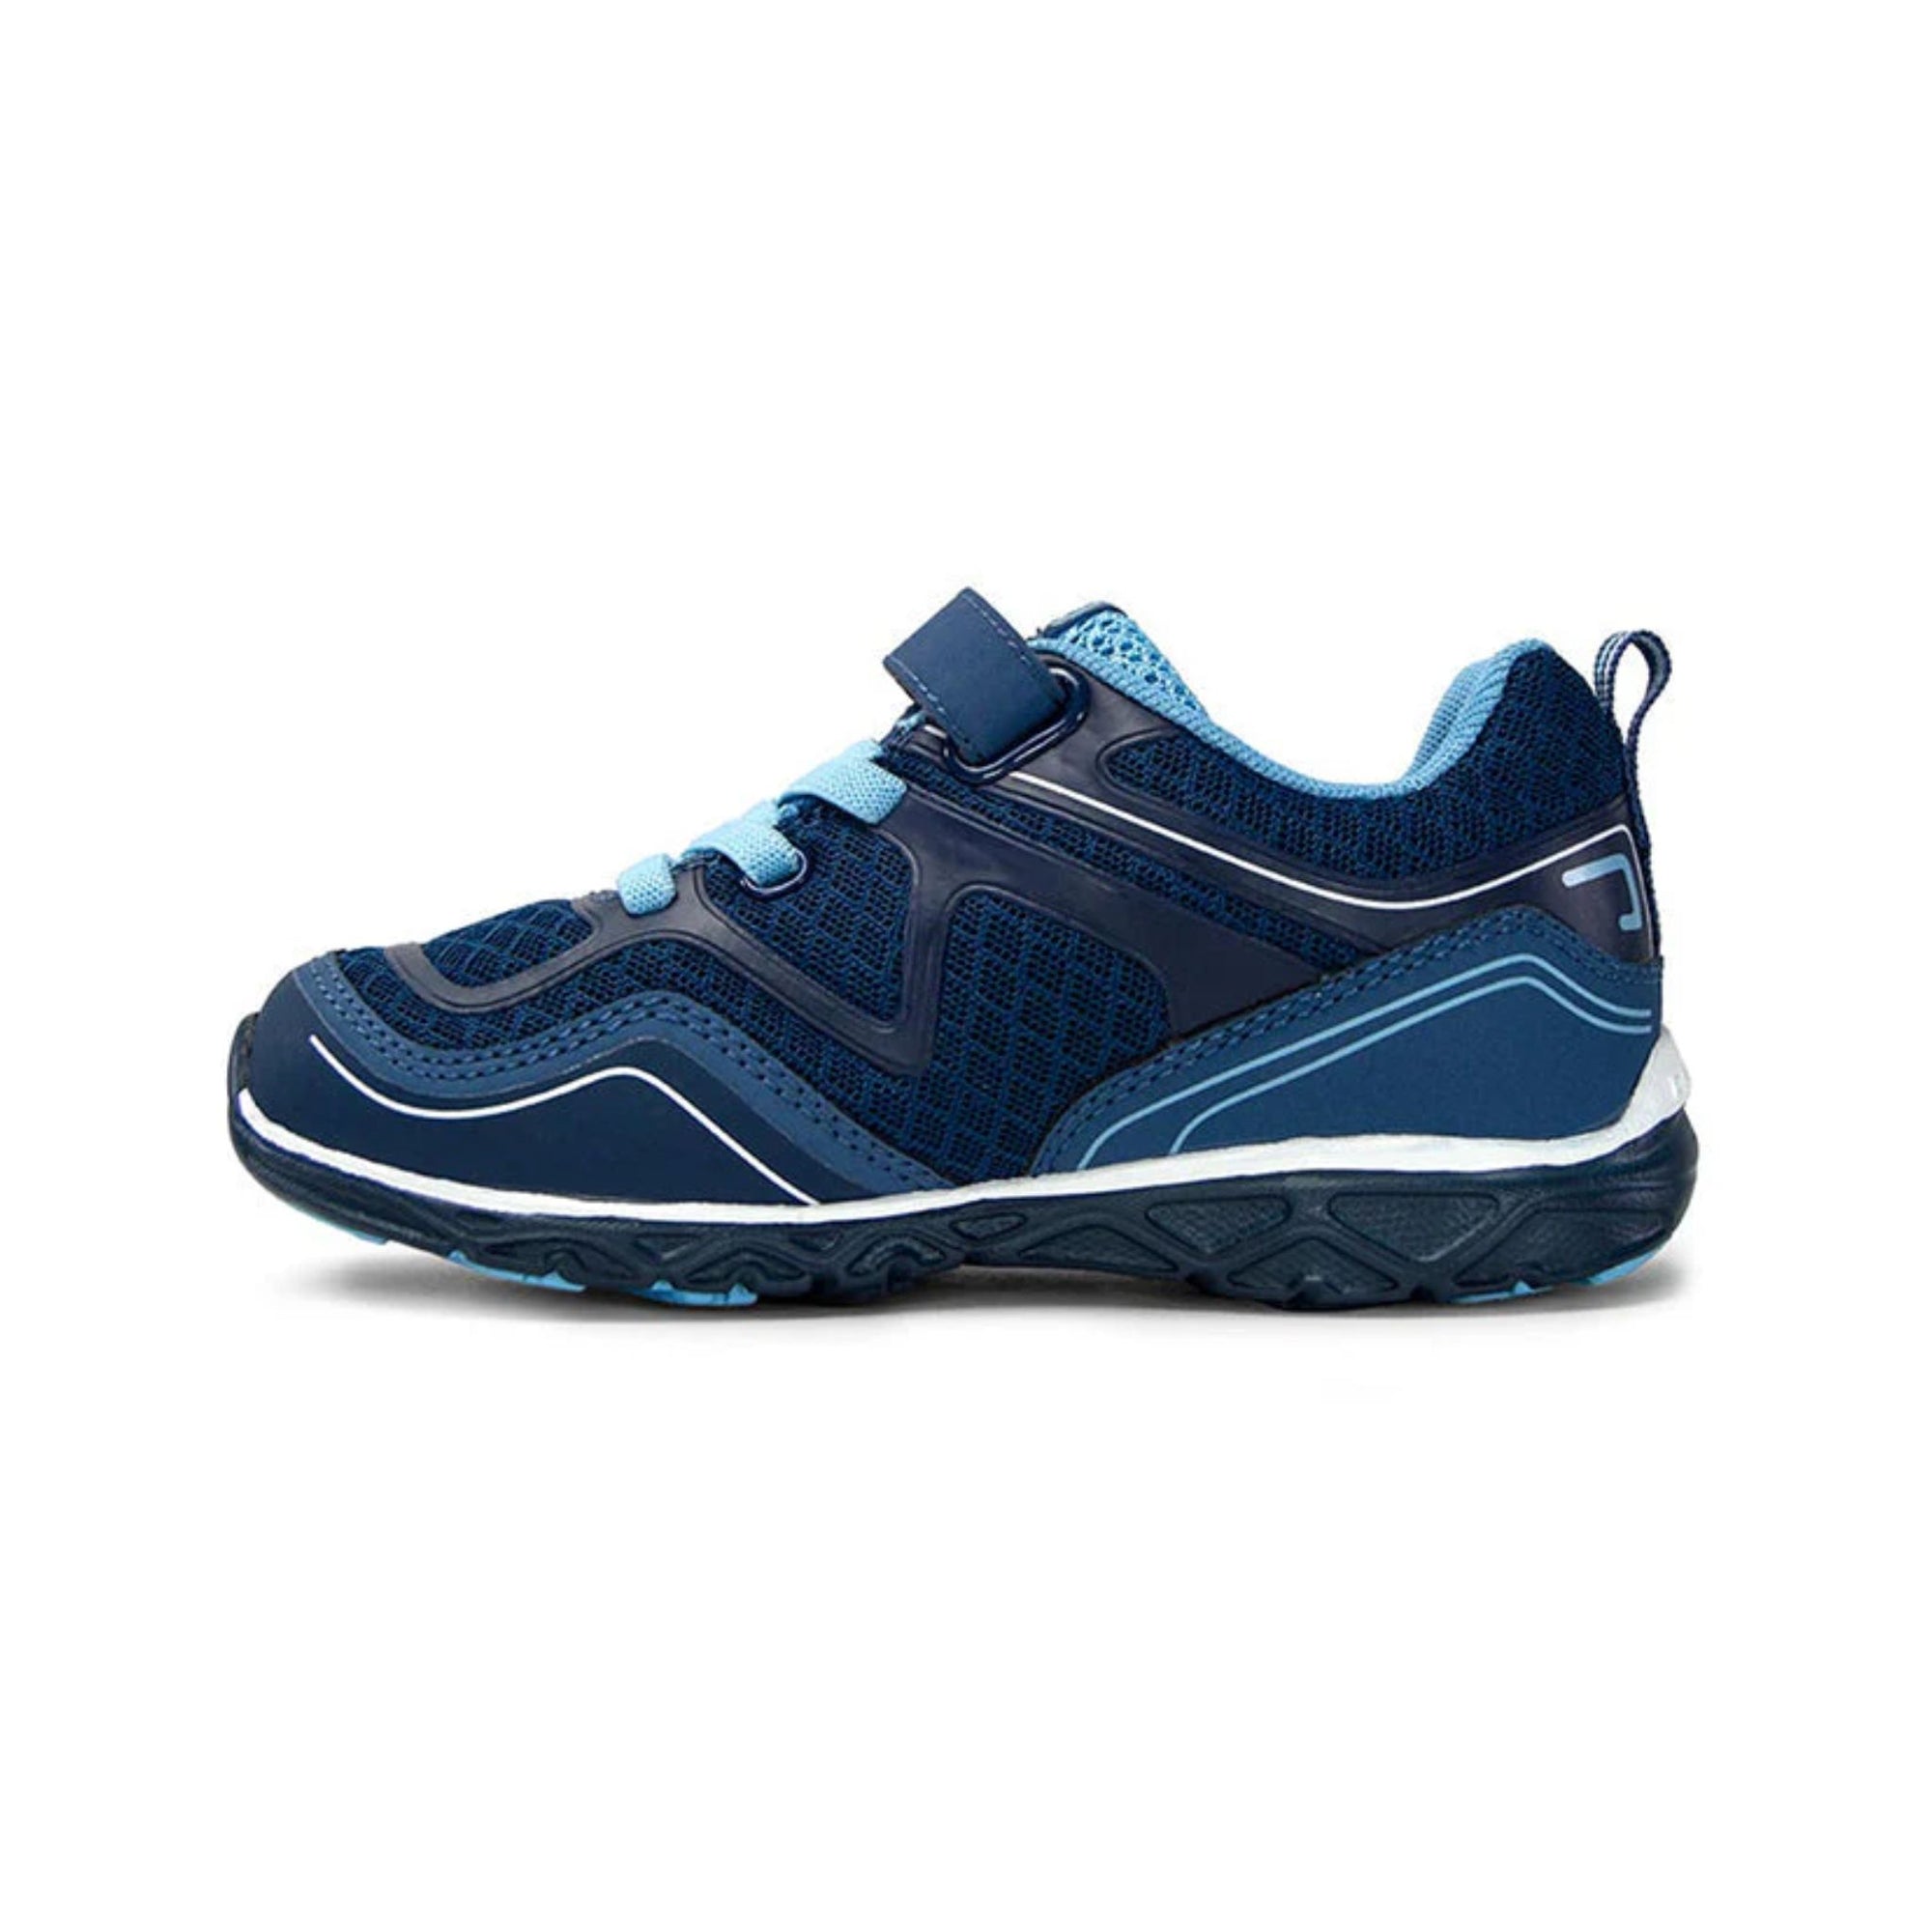 Pediped Flex Force Iceburg Athletic Shoes